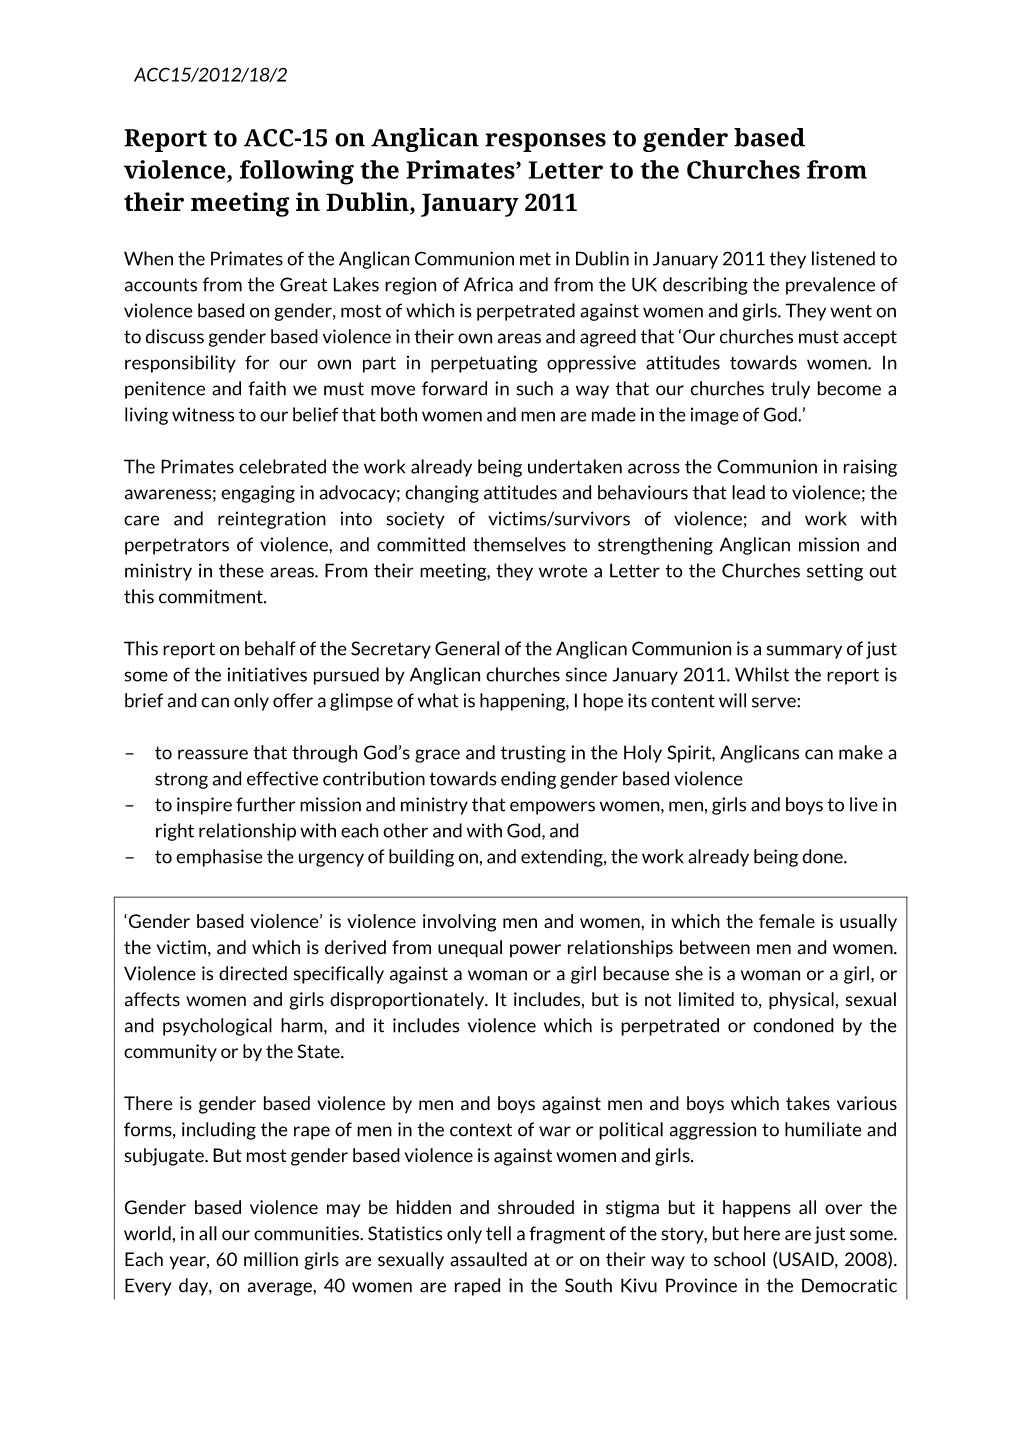 Report to ACC-15 on Anglican Responses to Gender Based Violence, Following the Primates’ Letter to the Churches from Their Meeting in Dublin, January 2011